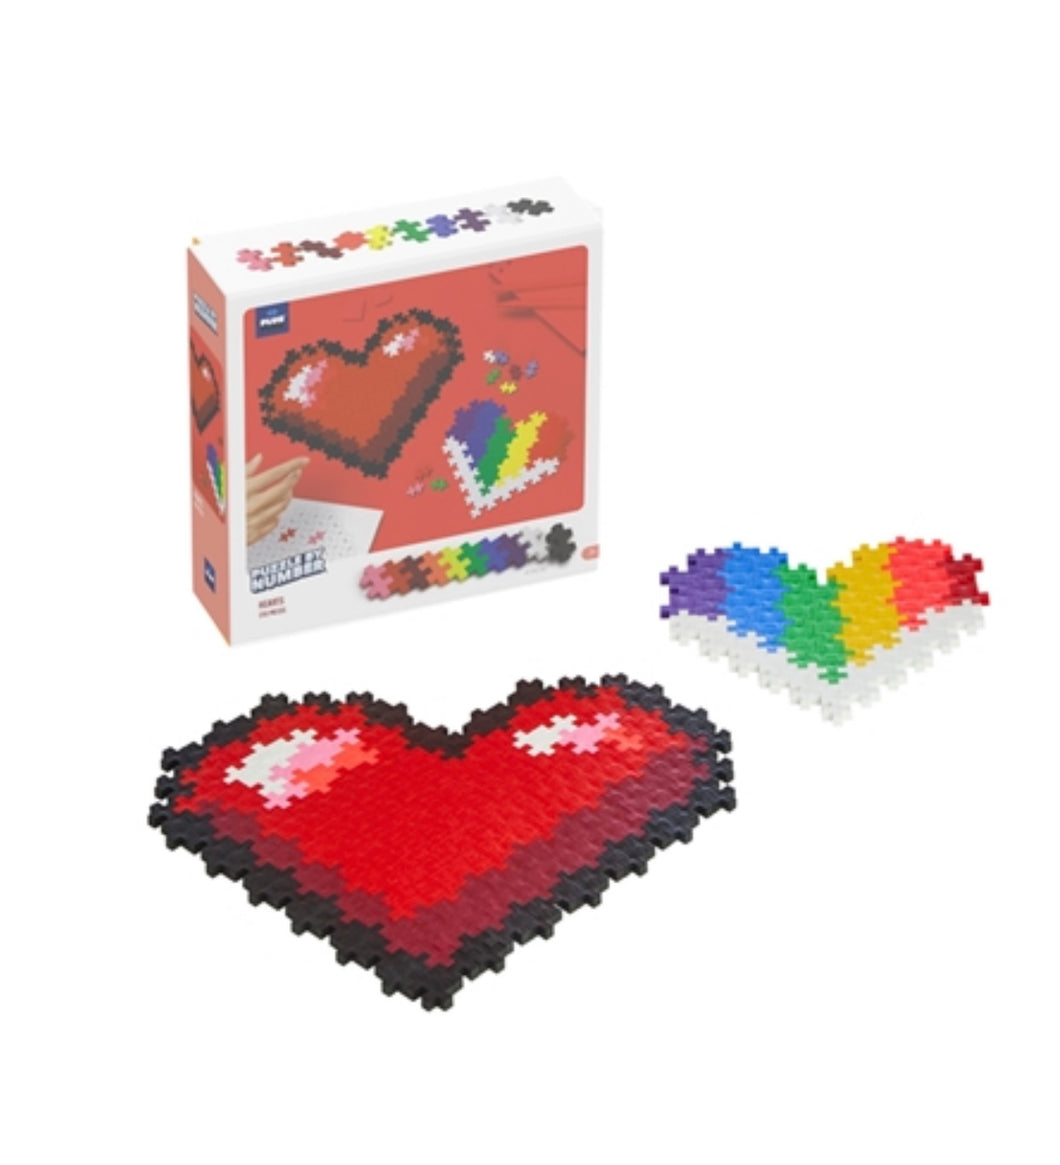 Puzzle by number plus plus heart